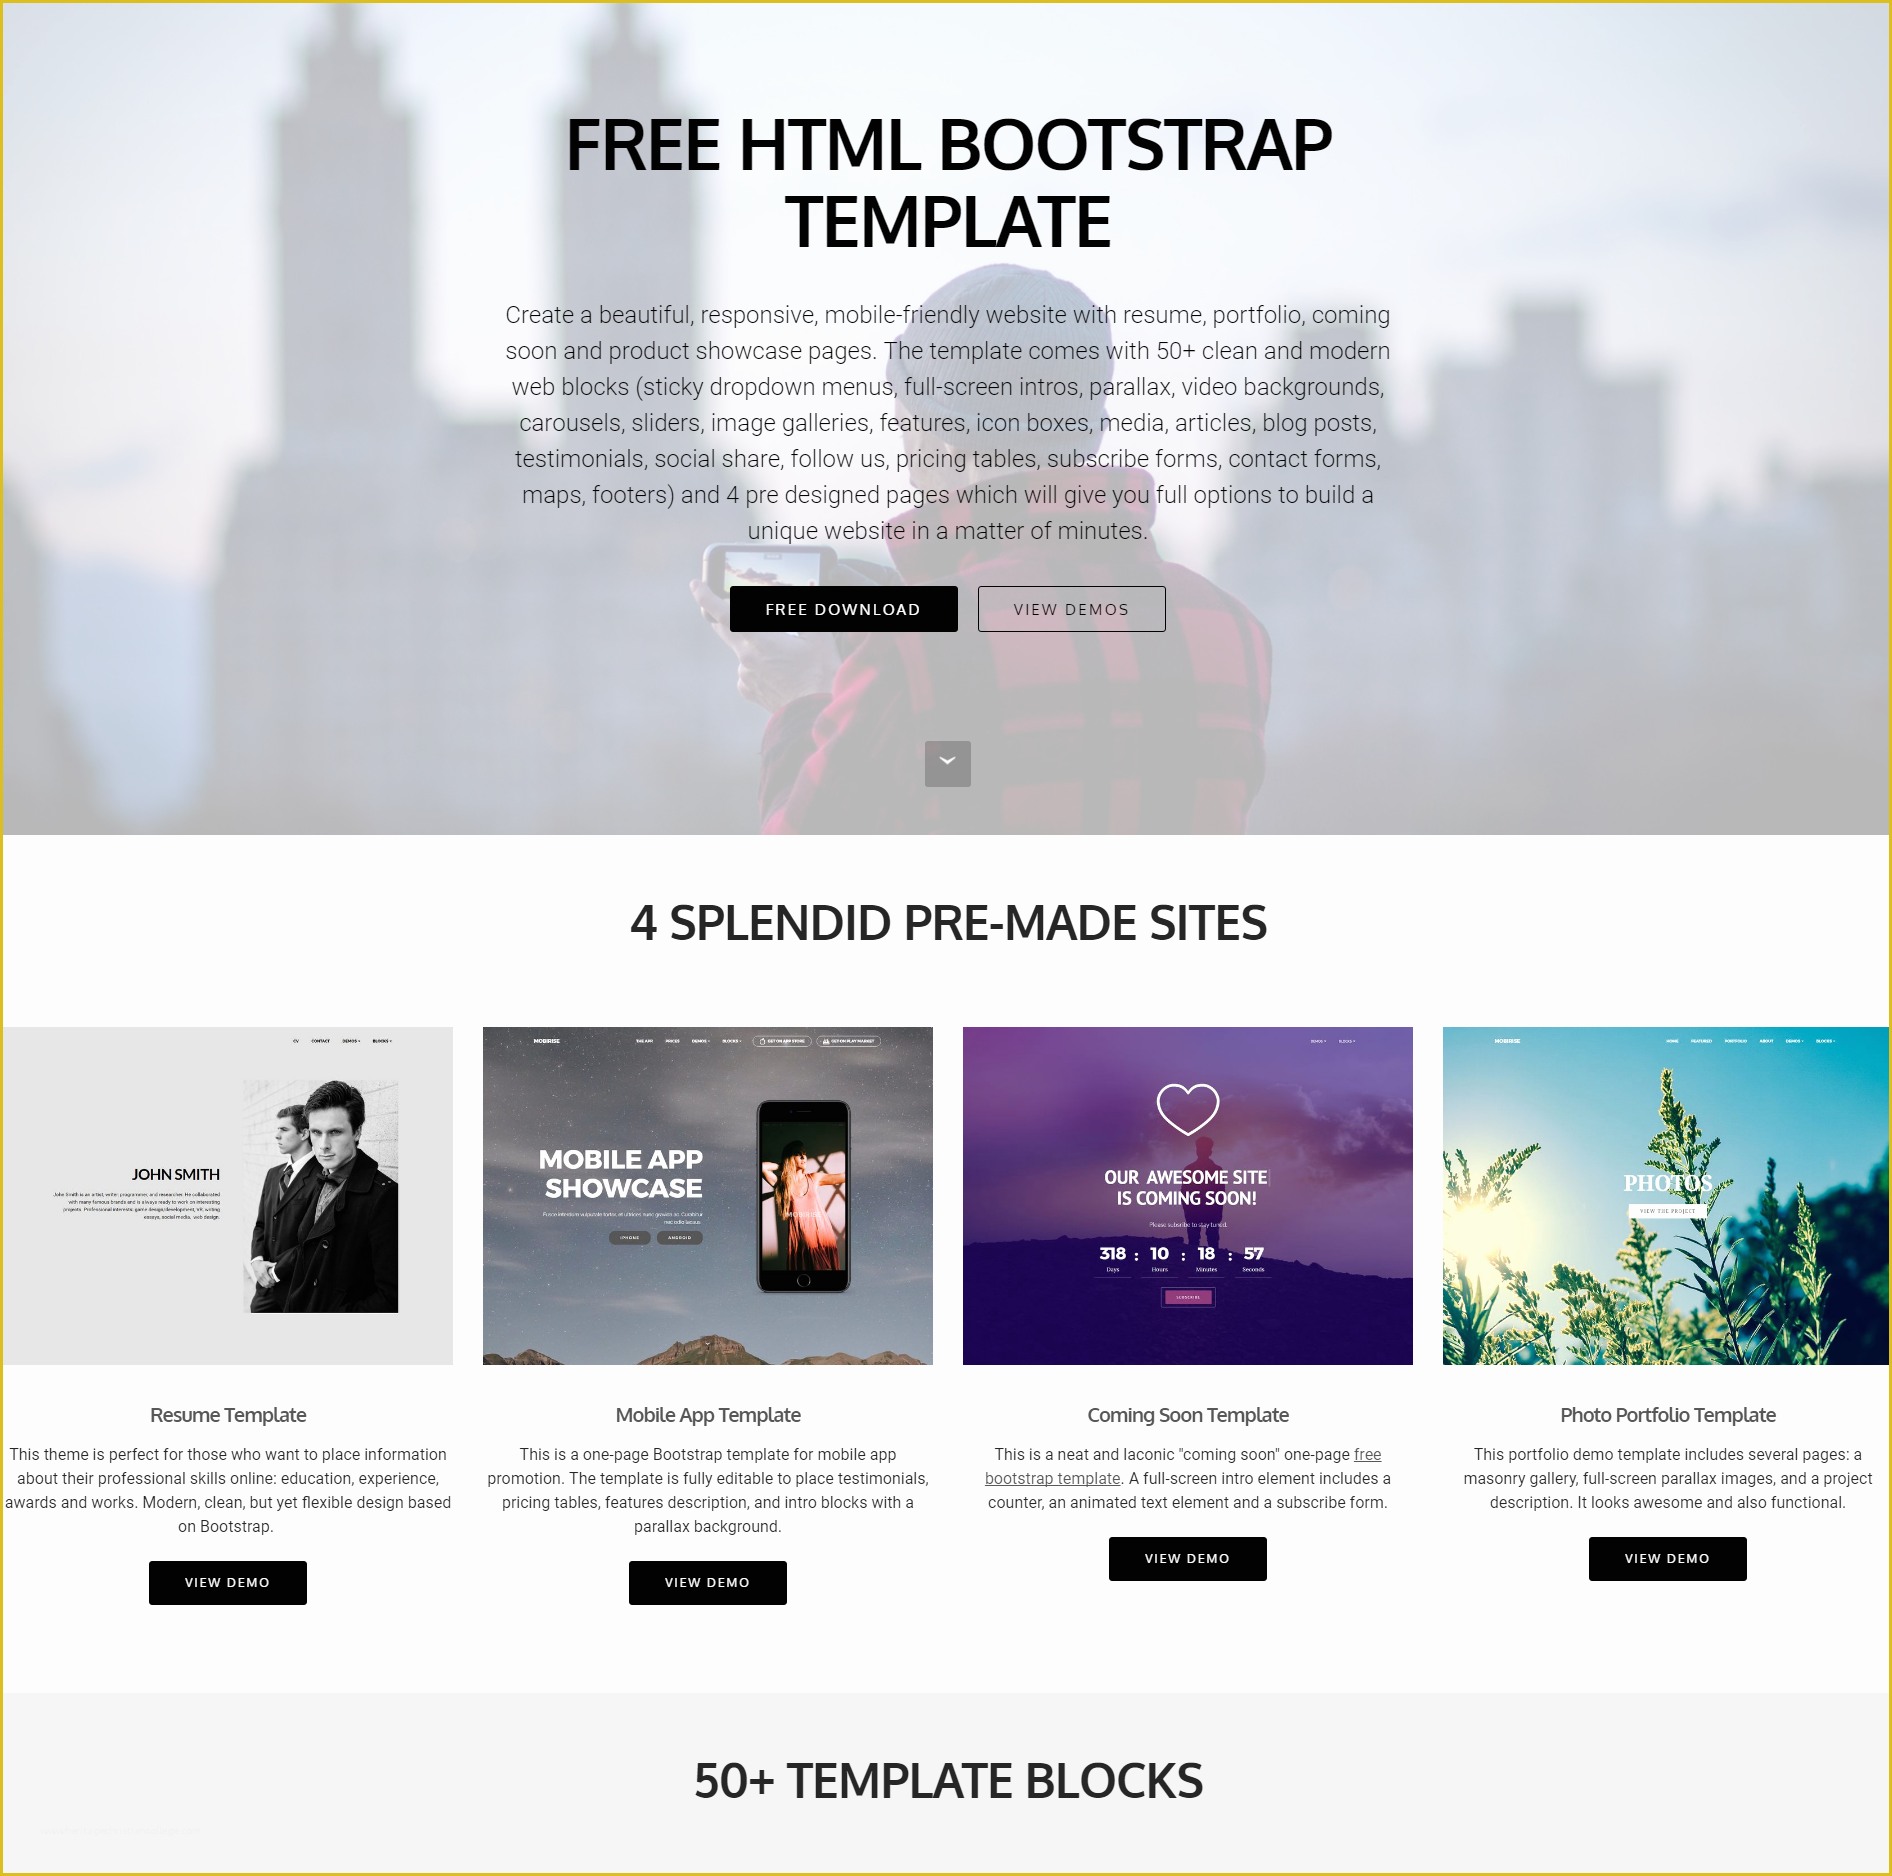 Free Sample HTML Web Page Templates Of 39 Brand New Free HTML Bootstrap Templates 2019